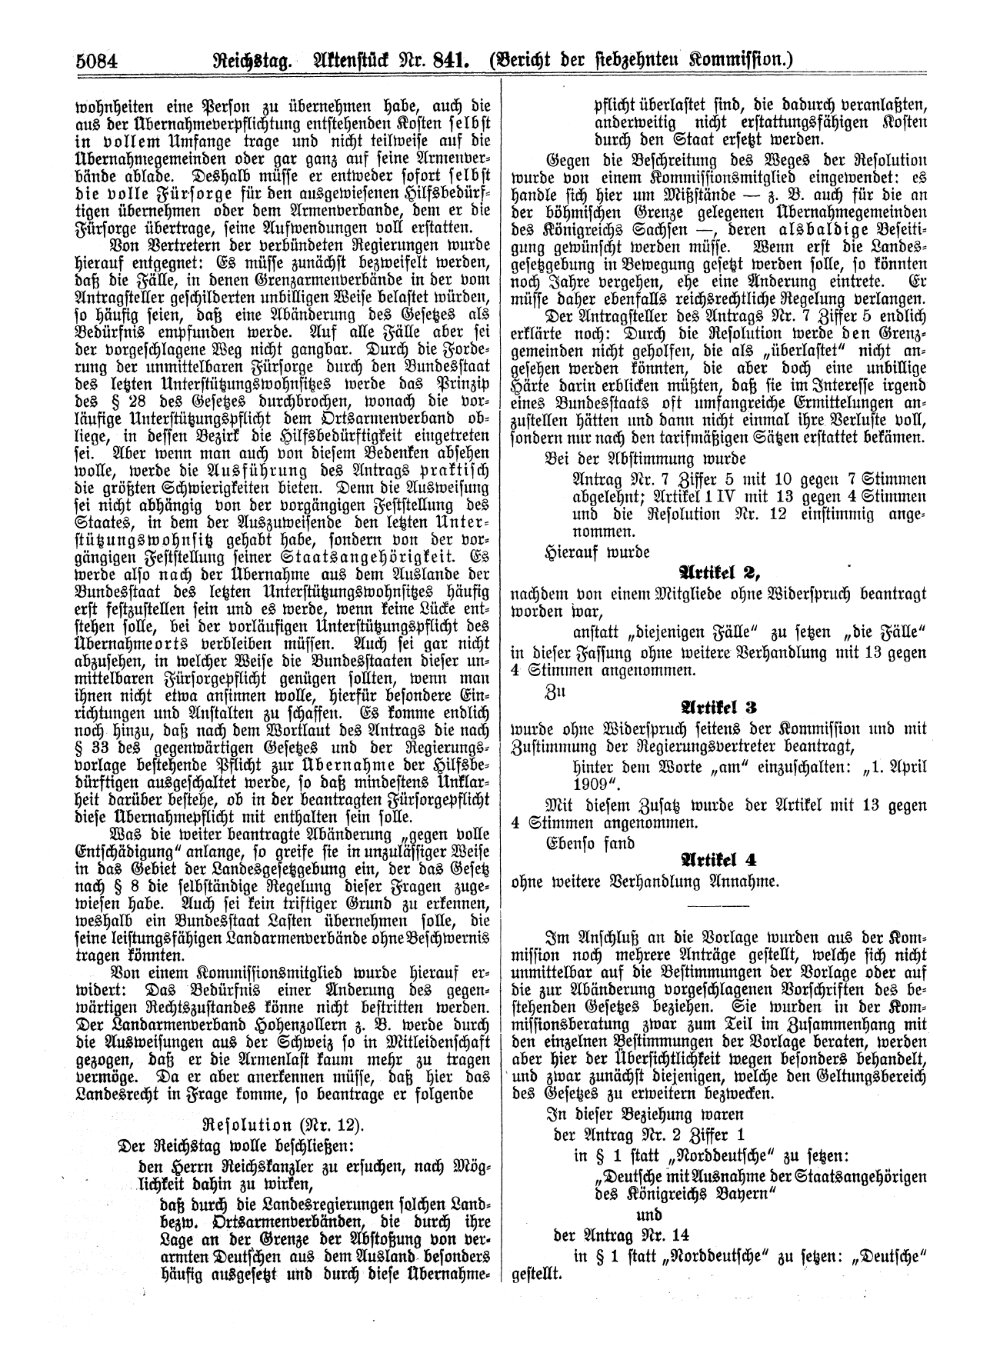 Scan of page 5084